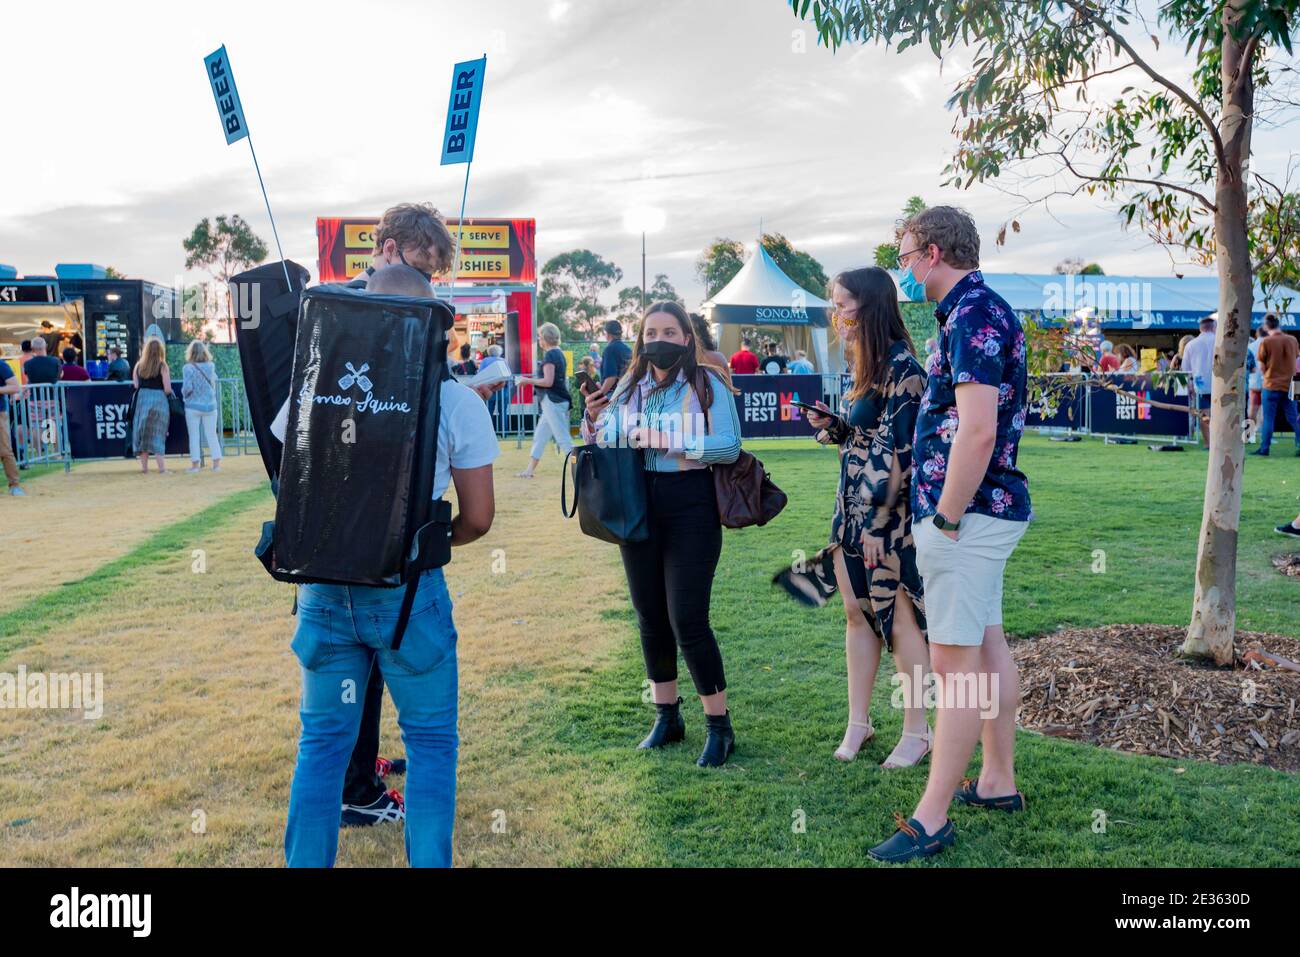 People buying beer at The Uncertain Four Seasons concert at Barangaroo Headland as part of the annual Sydney Festival in Australia Stock Photo